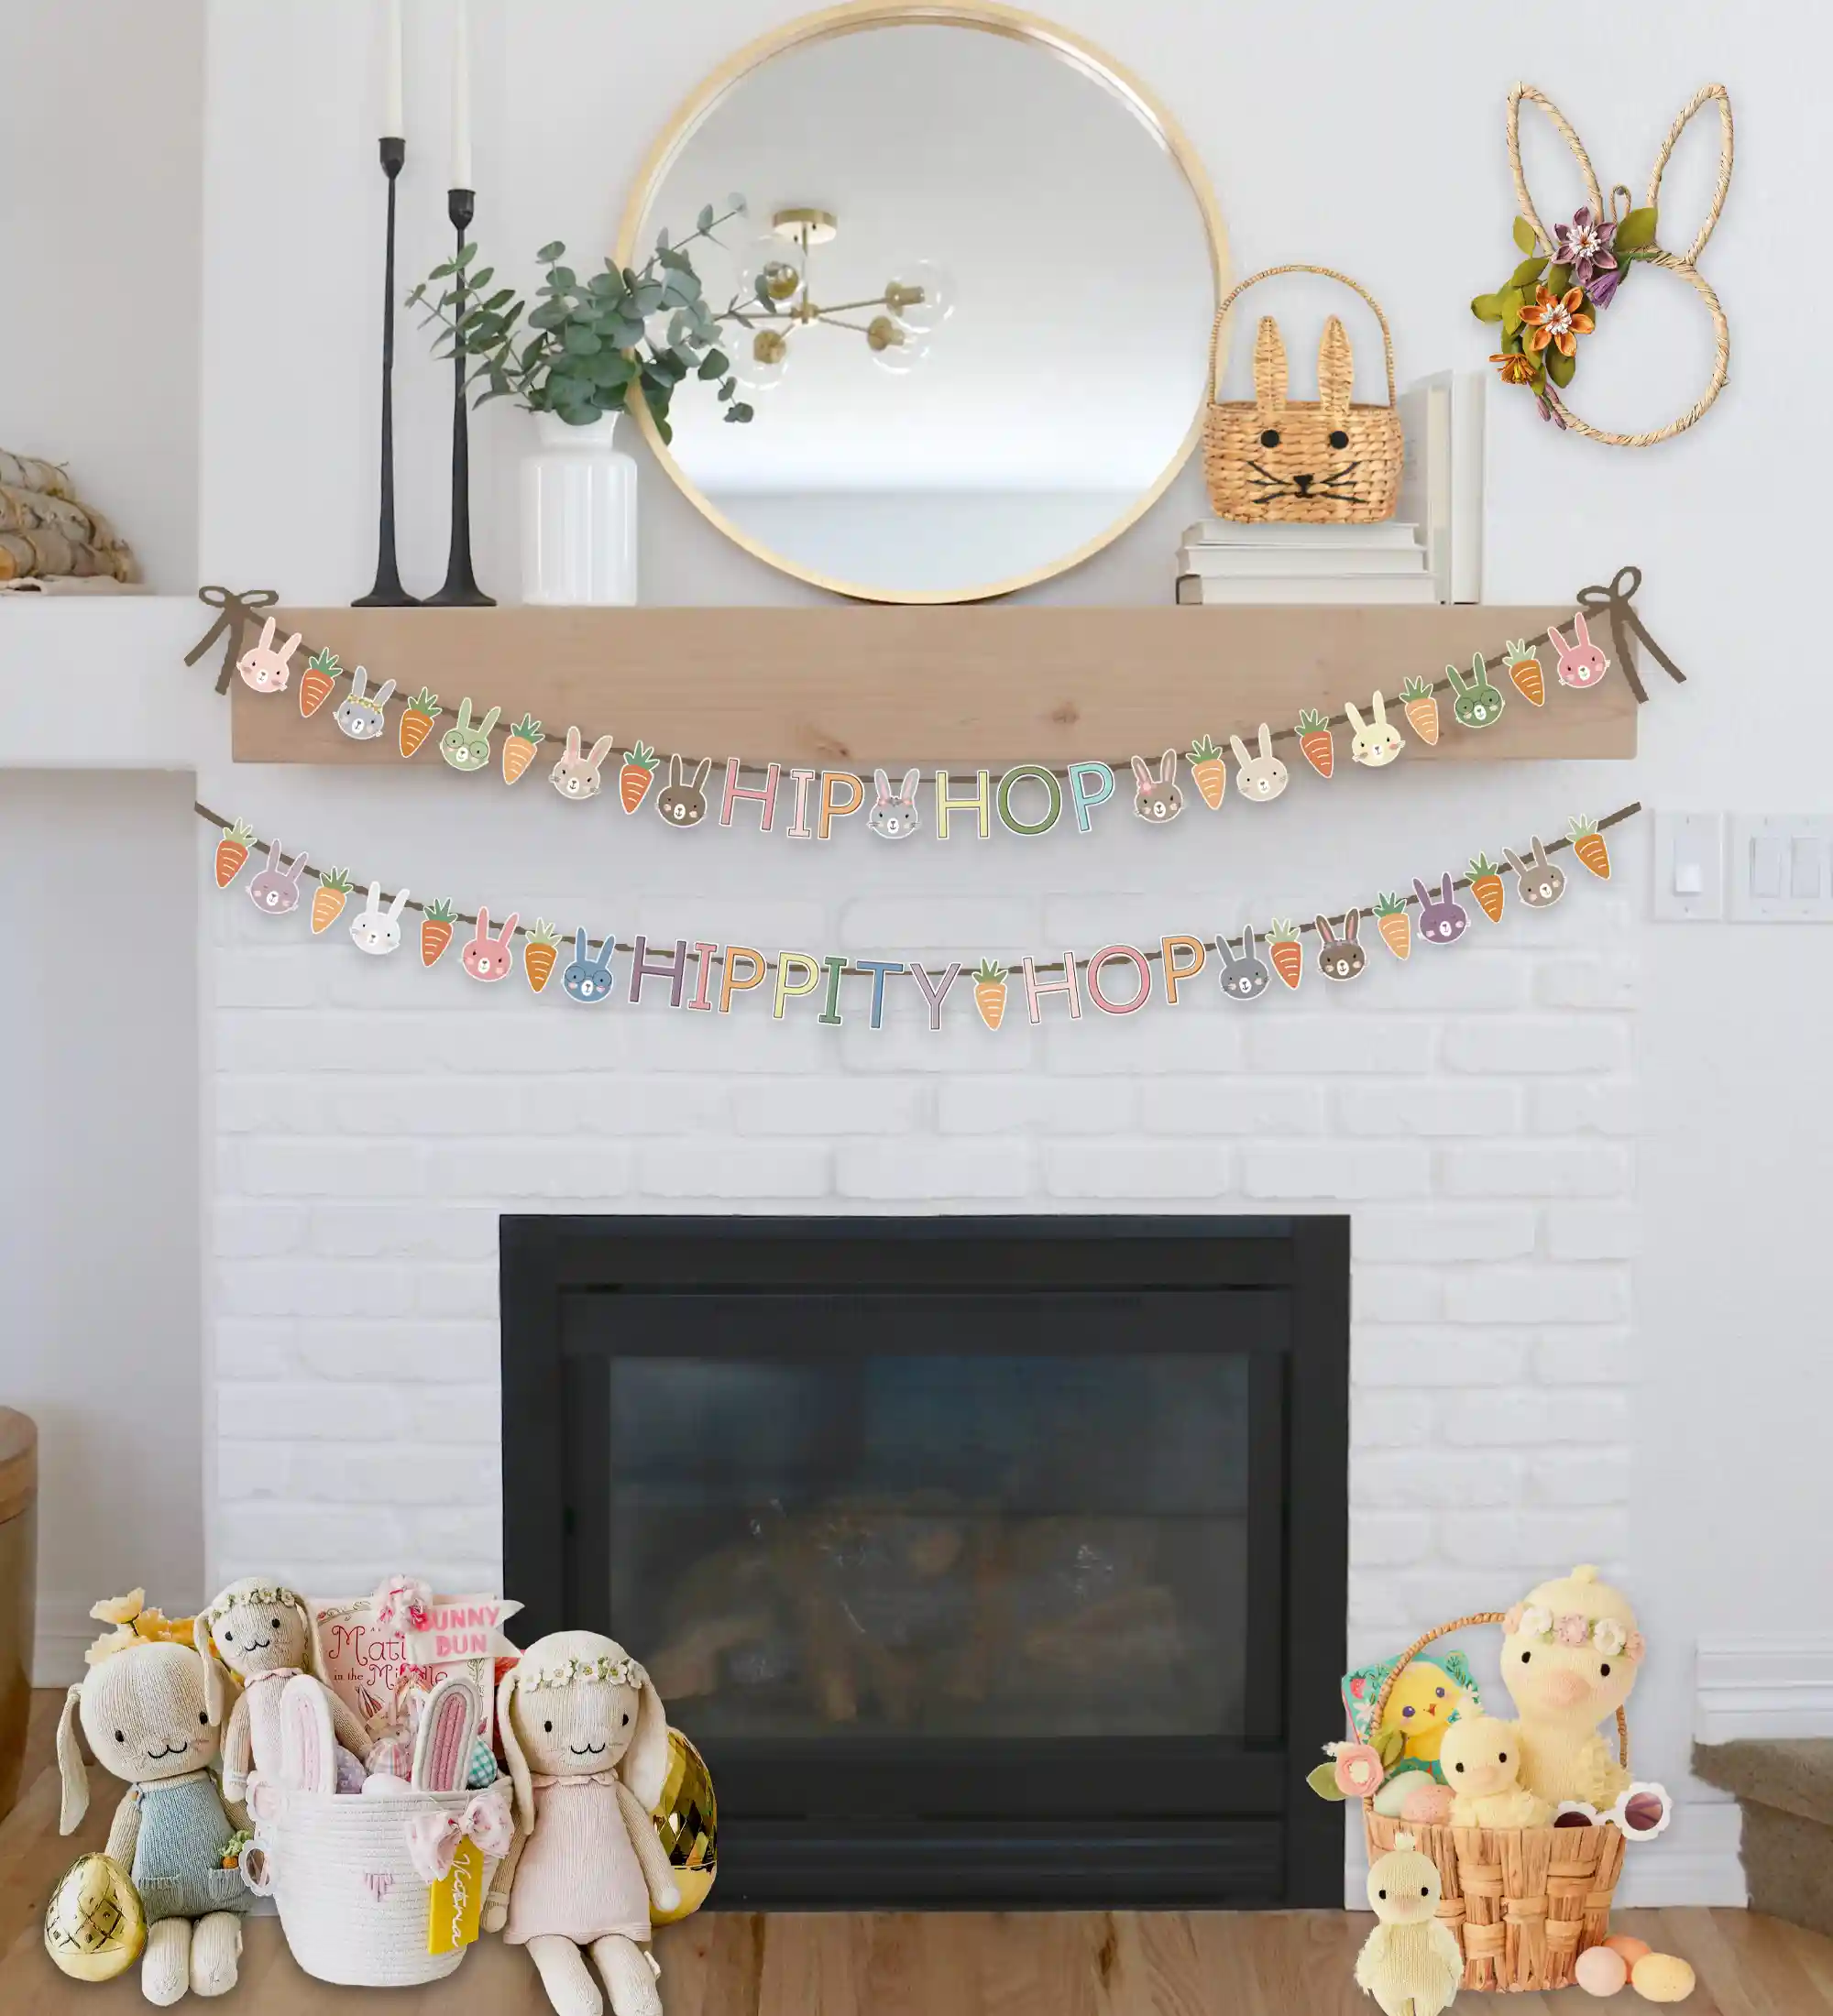 Simple and easy Easter garlands to help you decorate for Easter on a budget. These printable Easter garlands are a cheaper alternative to the Easter felt ball garlands and include lots of cute Easter bunnies, carrots. and the phrase Hip Hop Hippity Hop. This is an easy decoration for your Easter themed mantel or Easter party.